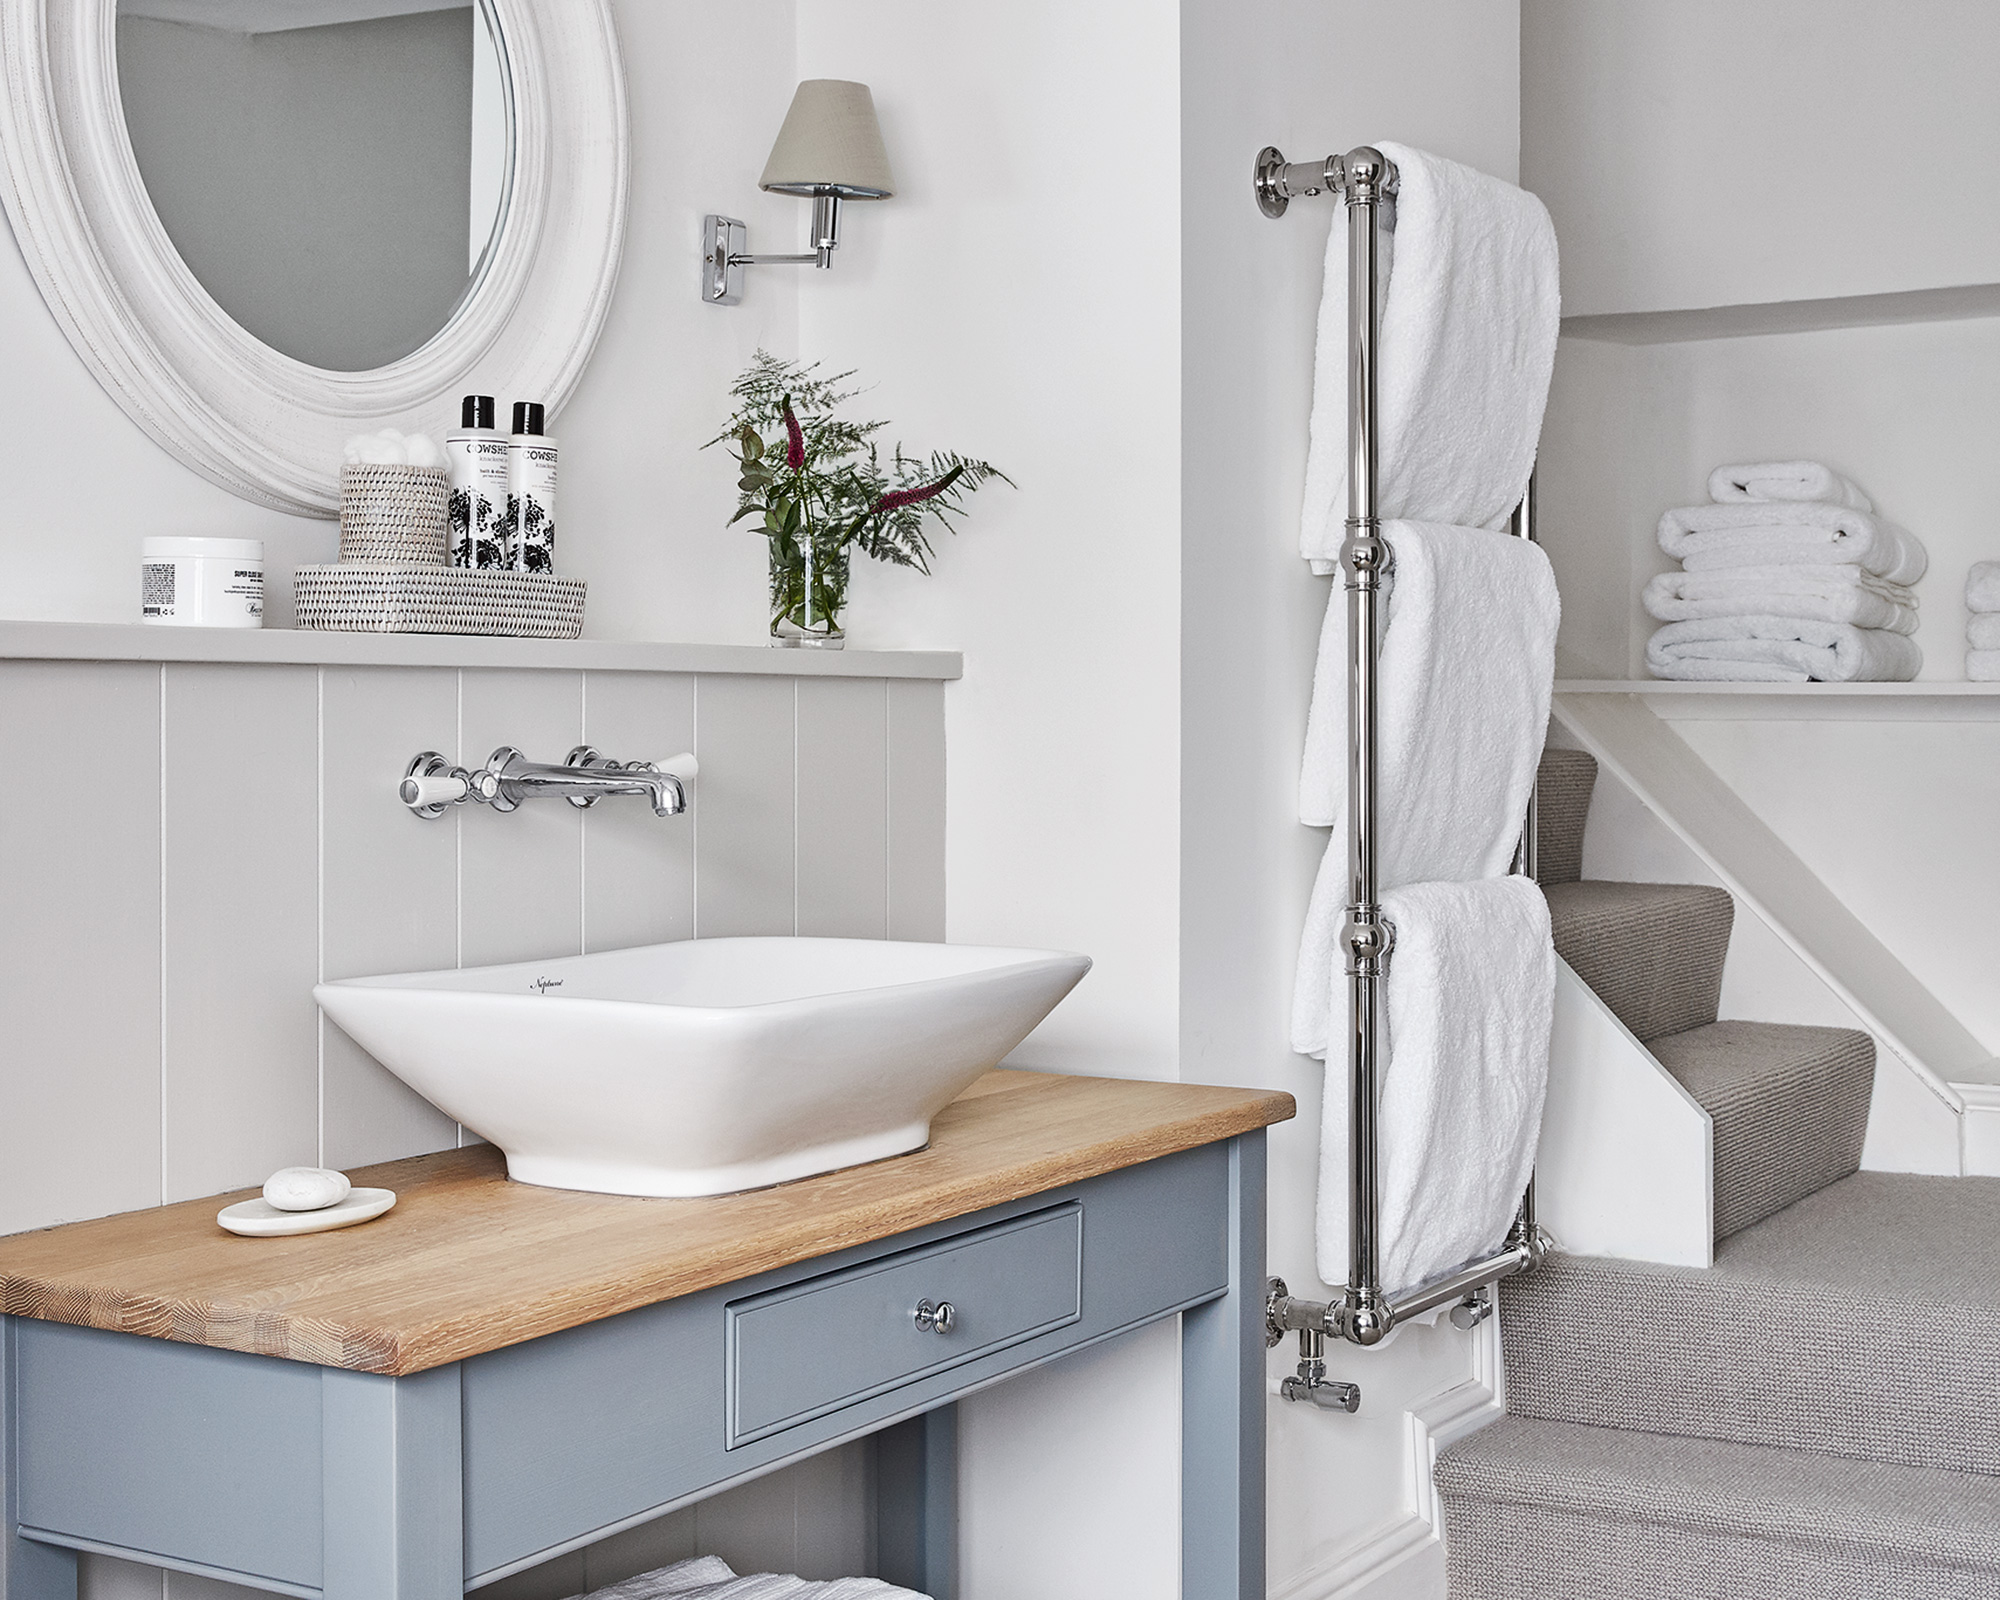 Freshen up Your Bath Linen with Crisp New white wash cloth